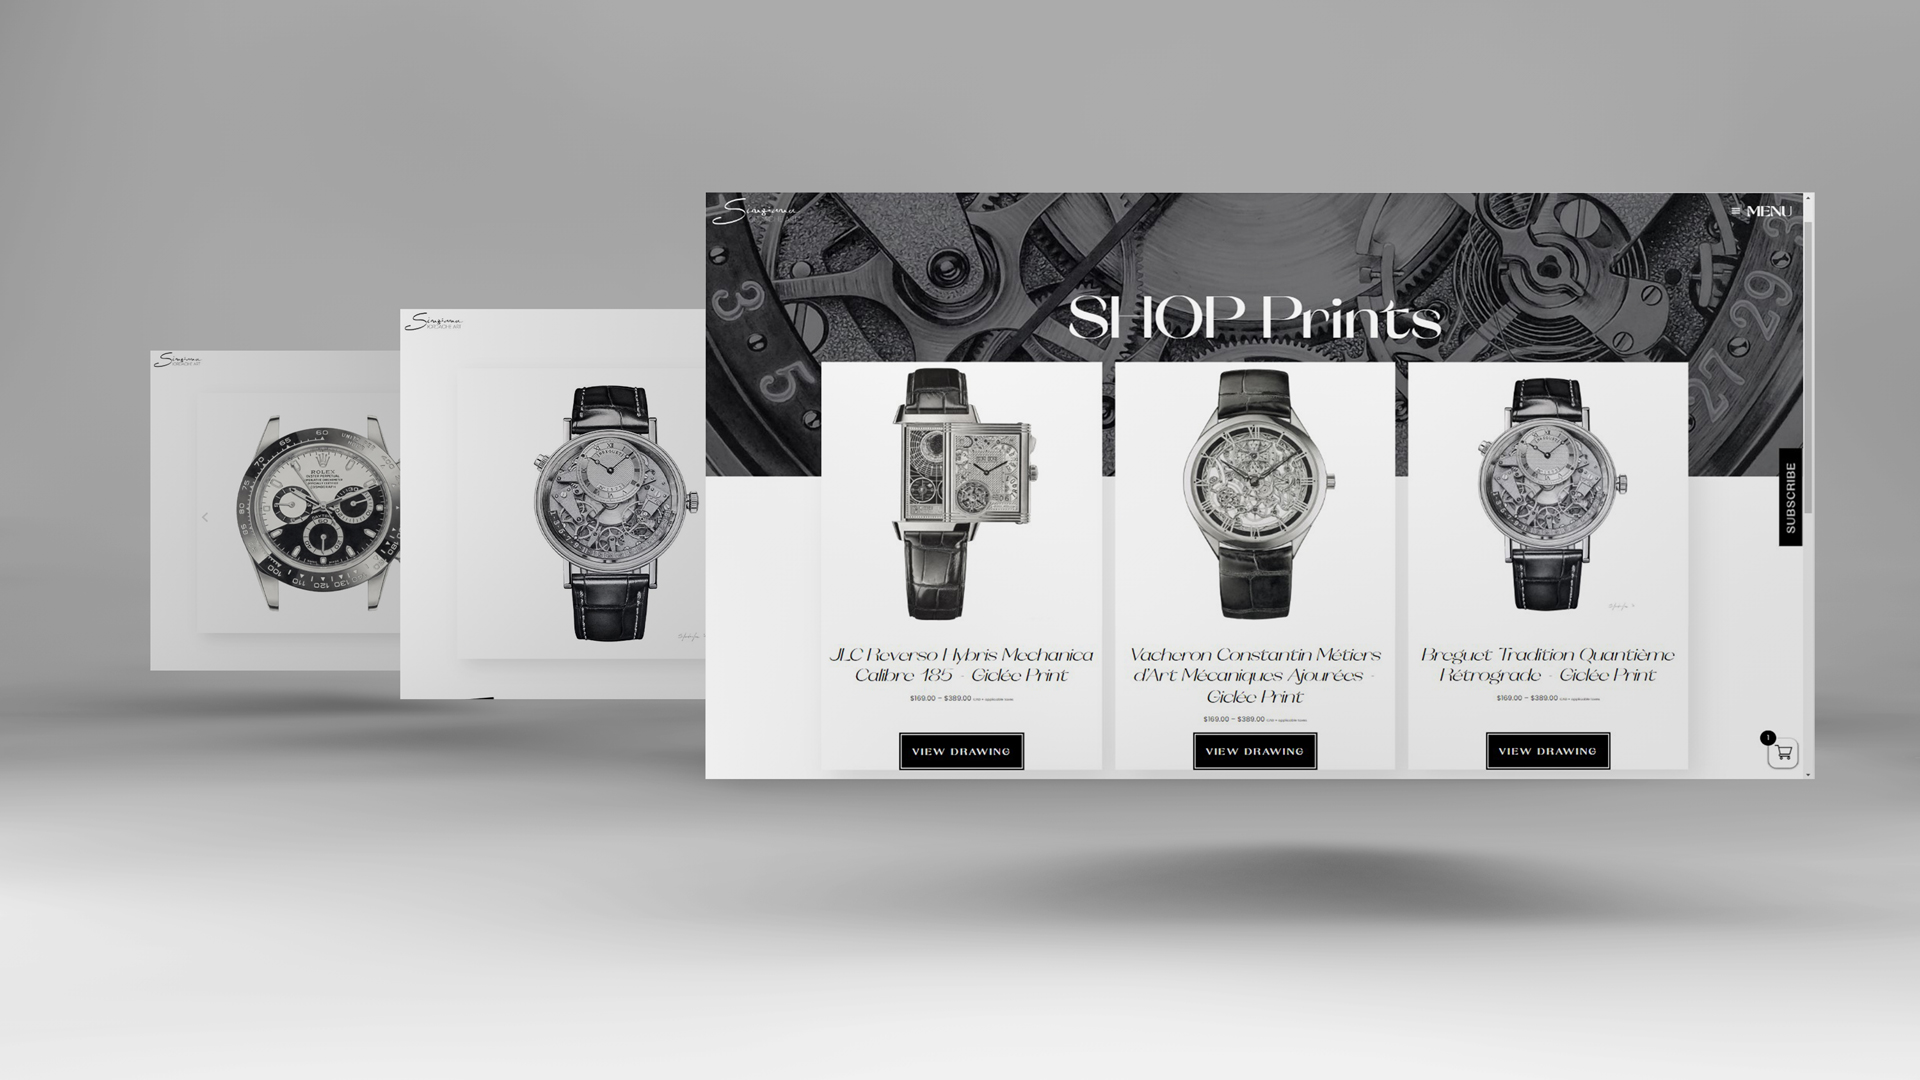 The image by PixelUp showcases the Sinziana Iordache Art Project, specifically highlighting the 'Shop Prints' page. It features a grid layout displaying artwork with images, titles, and prices on a minimalistic white background, enhancing visual clarity and focus on the artwork. A banner image of a hyperrealistic watch drawing adds depth and intrigue.